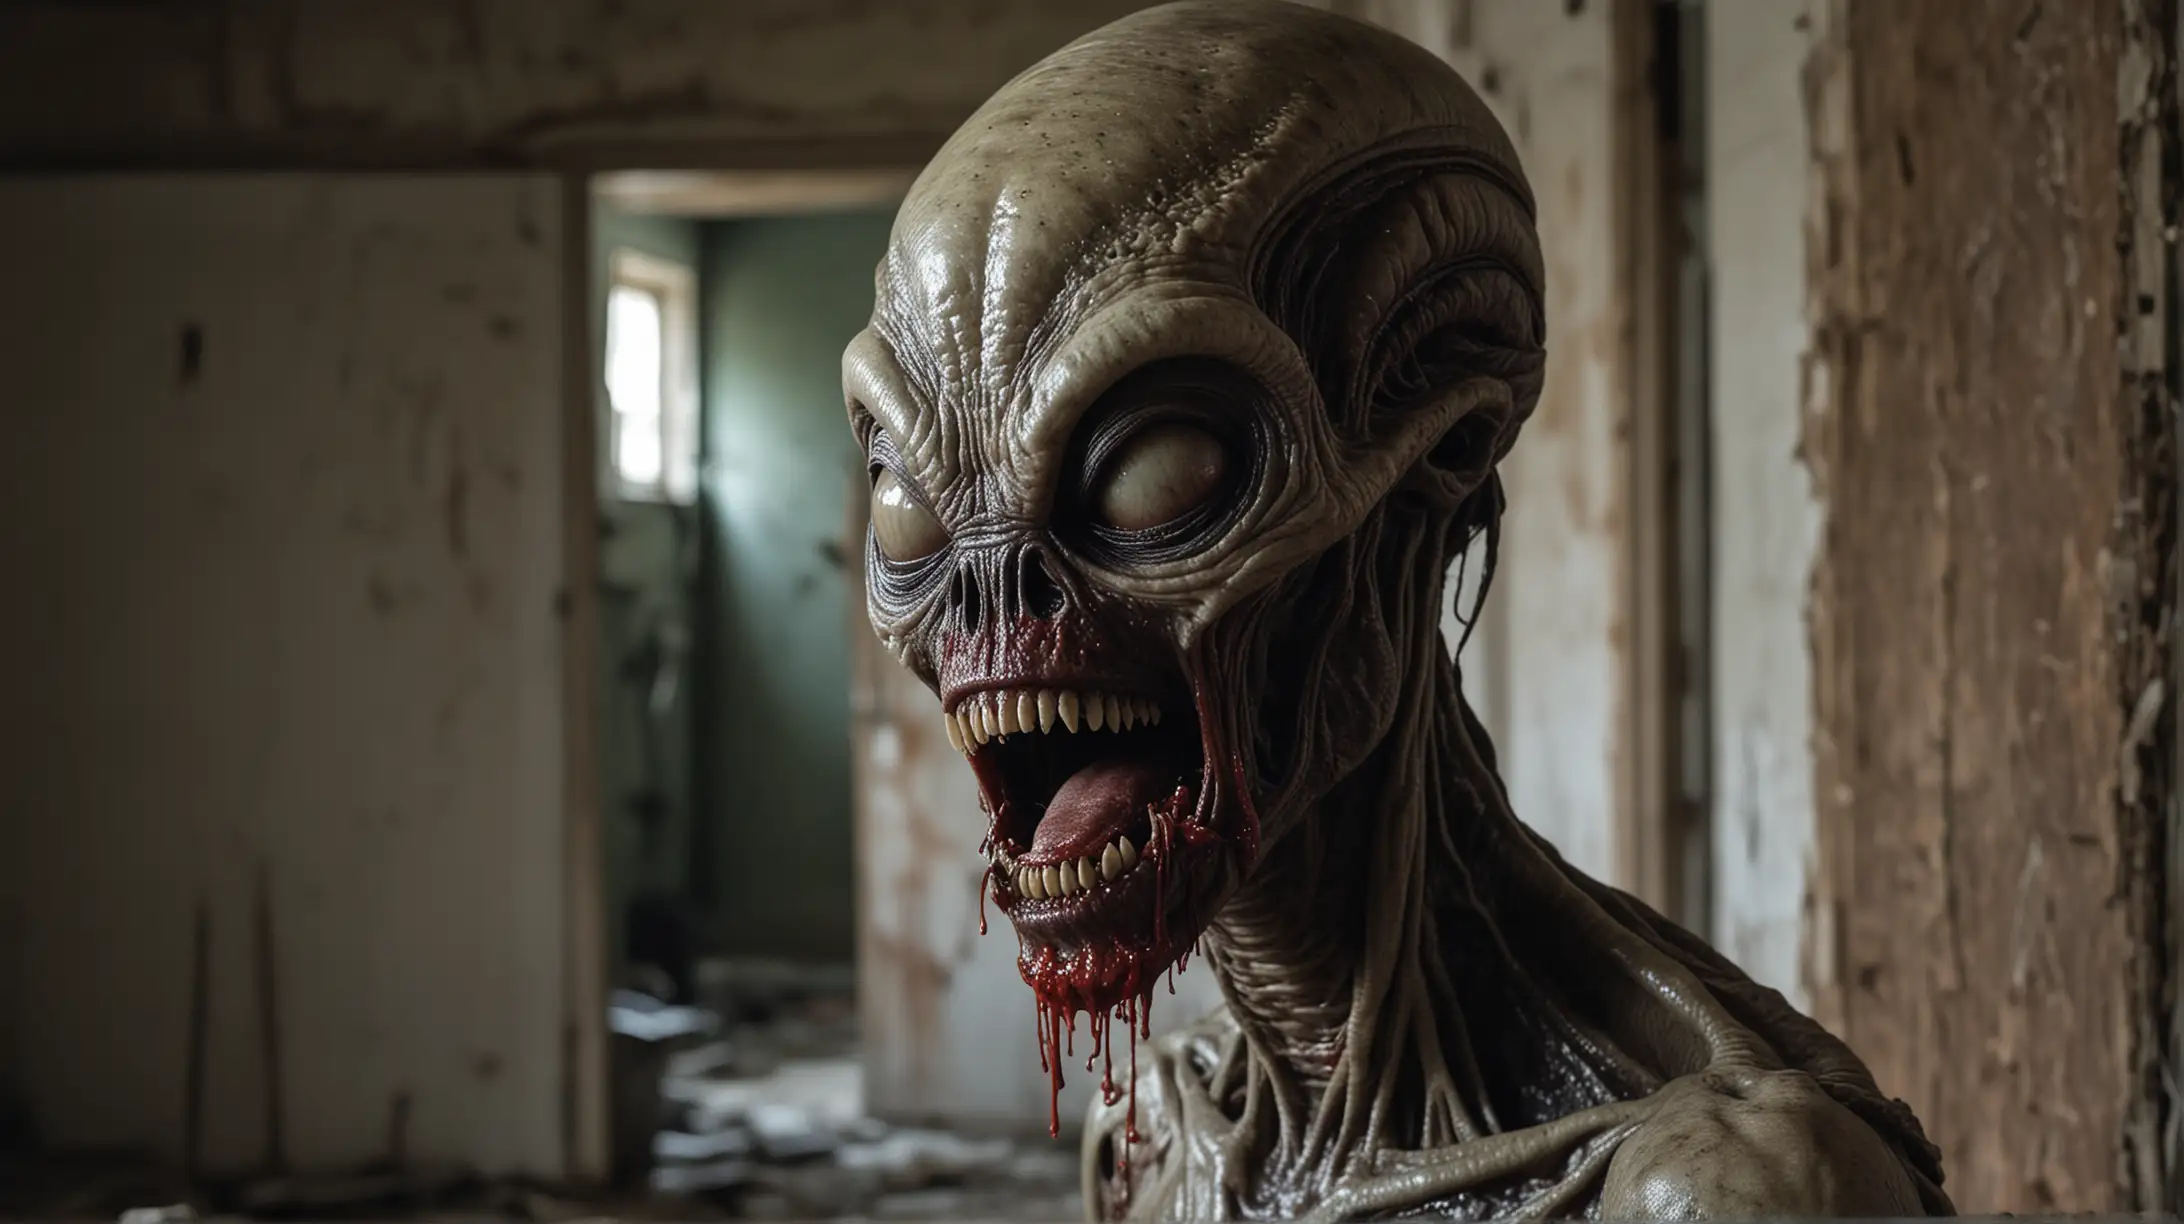 alien looking like the old Alien movie  in a abandoned house with lots of blood. With dangerous teeth and drool